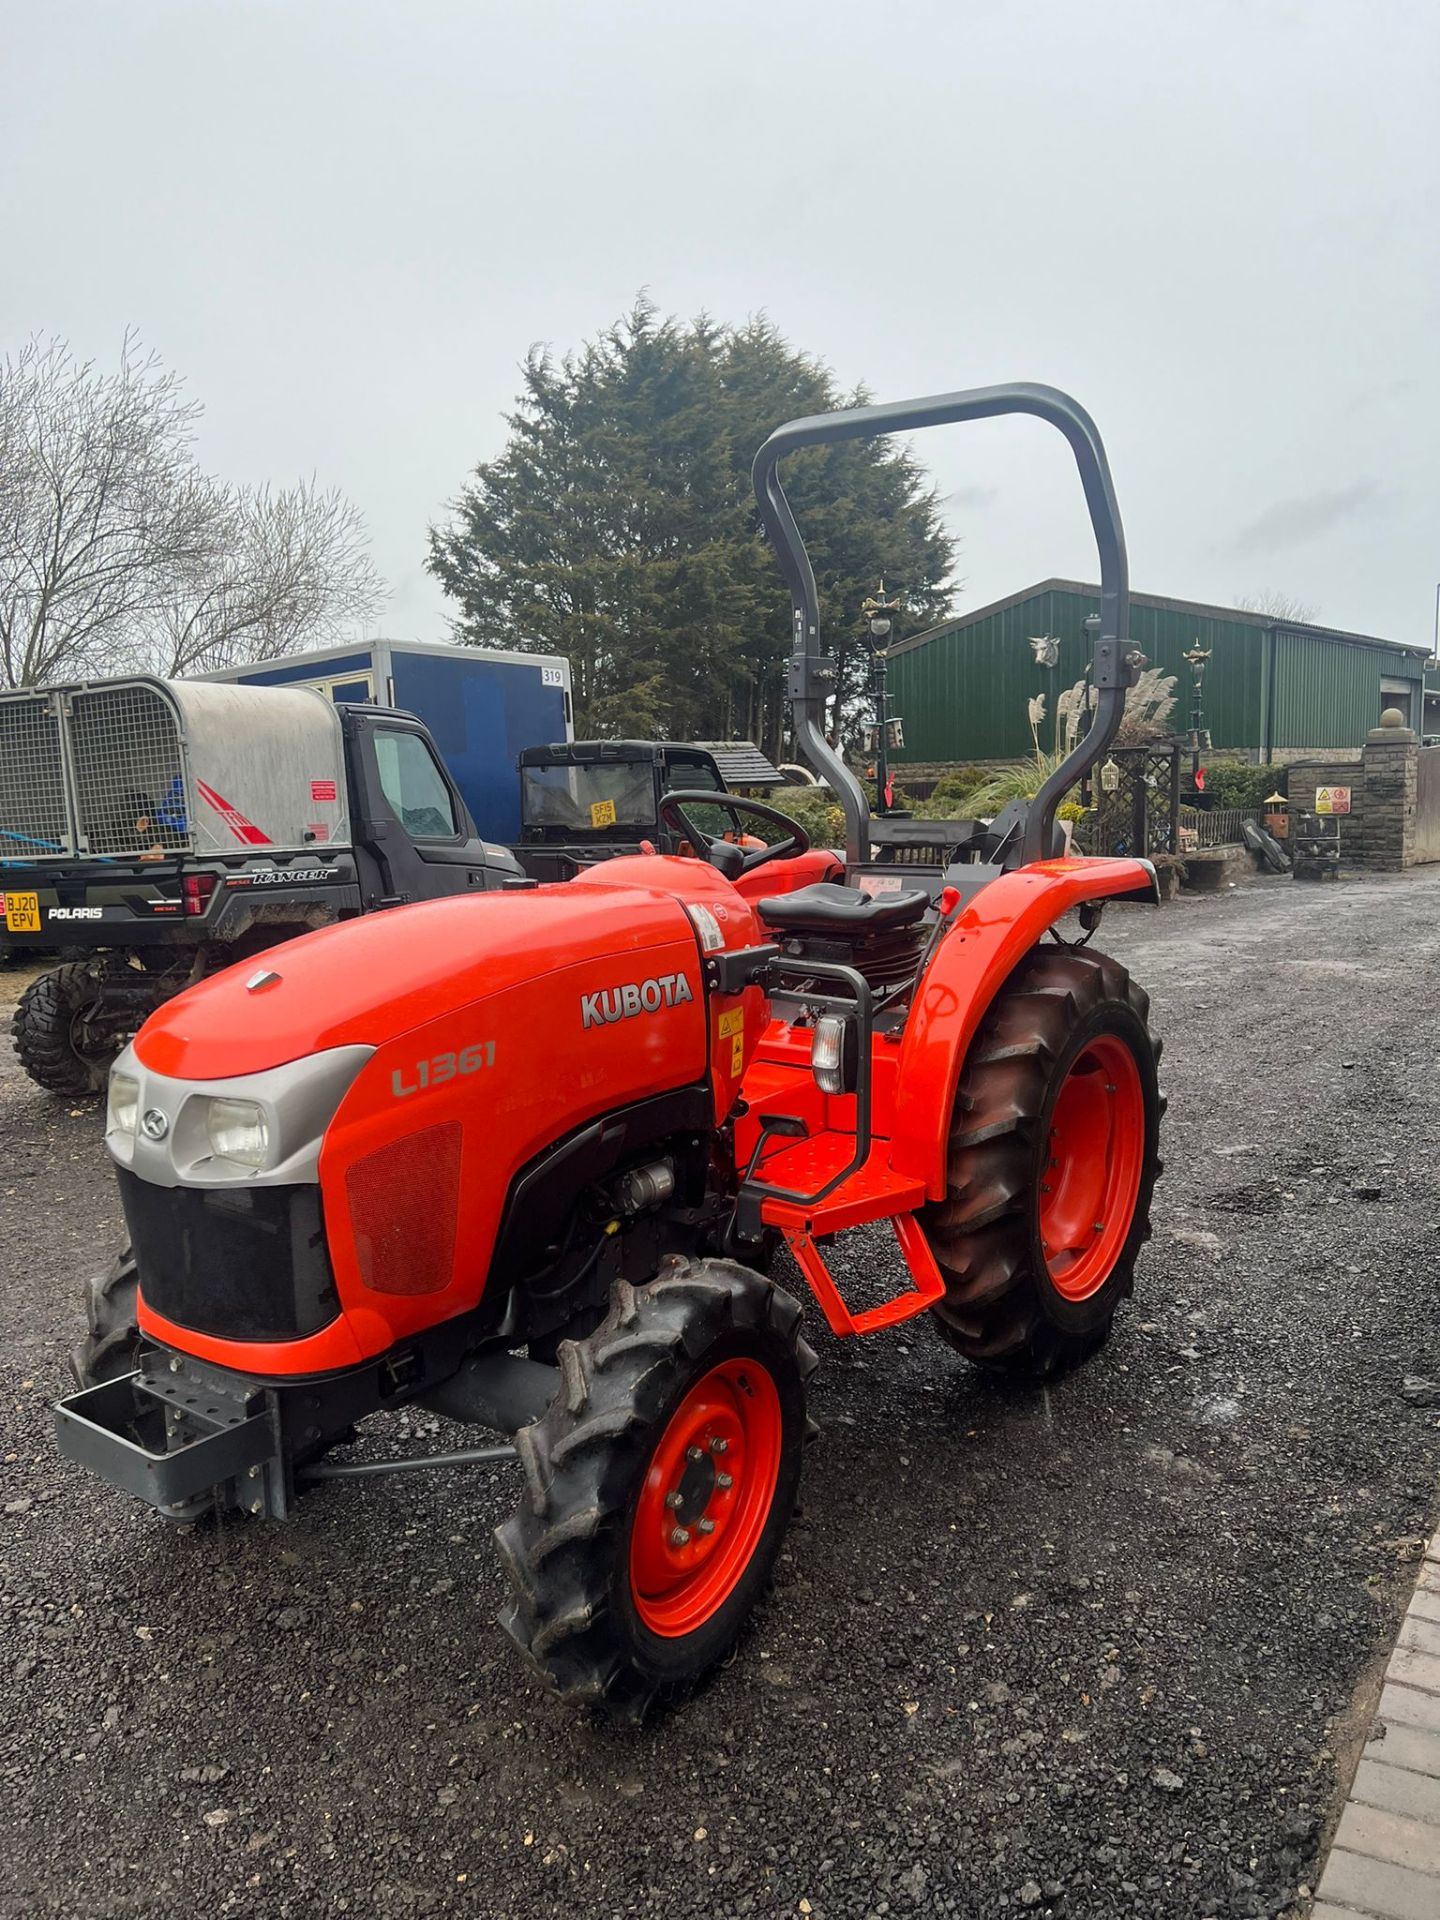 2019 KUBOTA L1361 4 WHEEL DRIVE TRACTOR, 36hp TRACTOR, RUNS AND WORKS *PLUS VAT* - Image 3 of 8